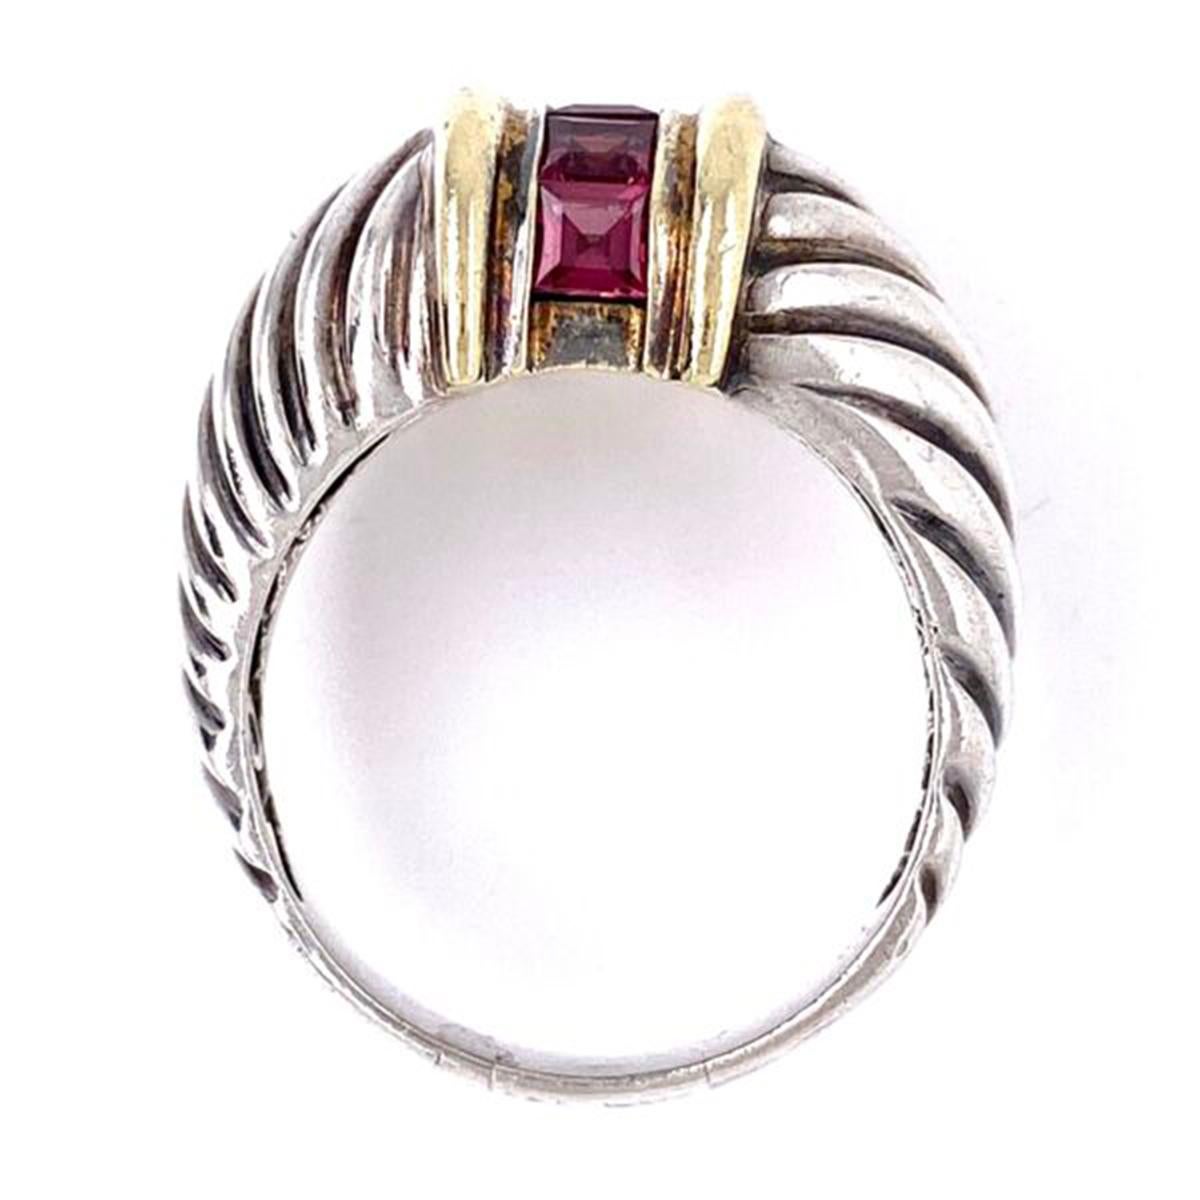 Awesome and finely detailed Iconic David Yurman Ring. Hand crafted in 14 Karat and Sterling Silver. Signed: YURMAN. The Ring is in excellent condition and was recently professionally cleaned and polished. Ring size: 8.25; we offer ring re-sizing.